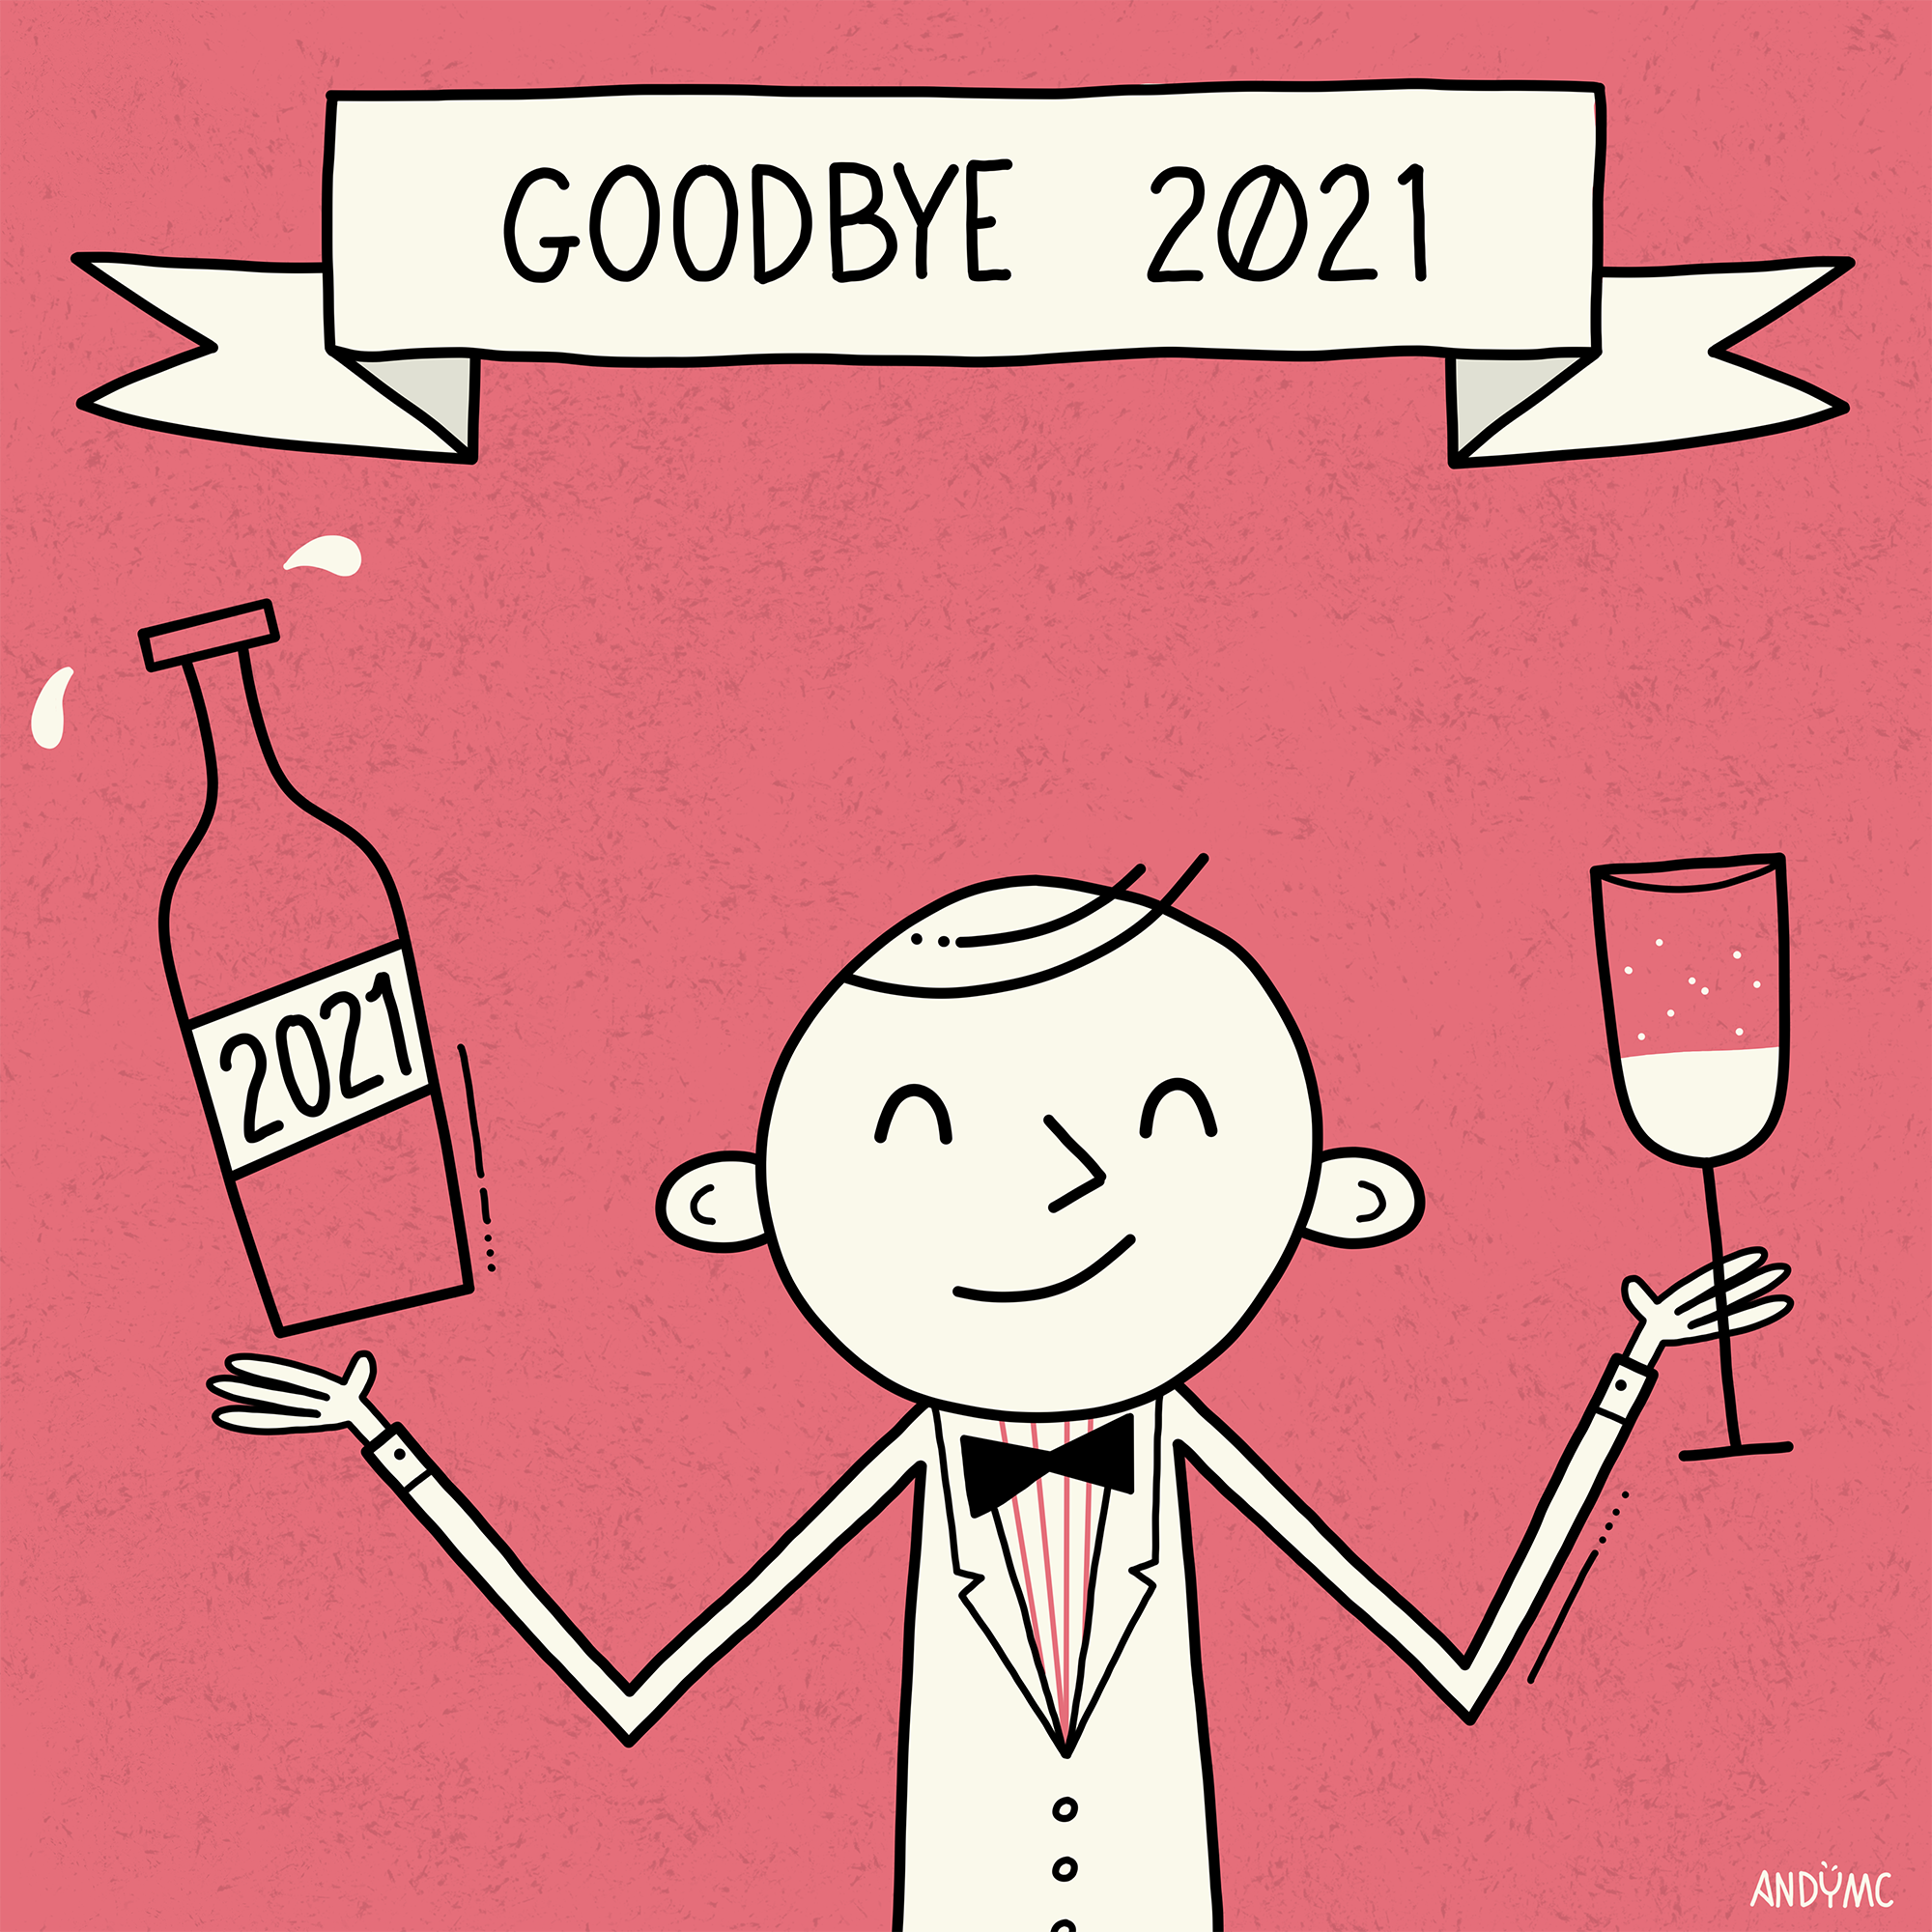 an illustration of a man in a suit with a champagne bottle and glass